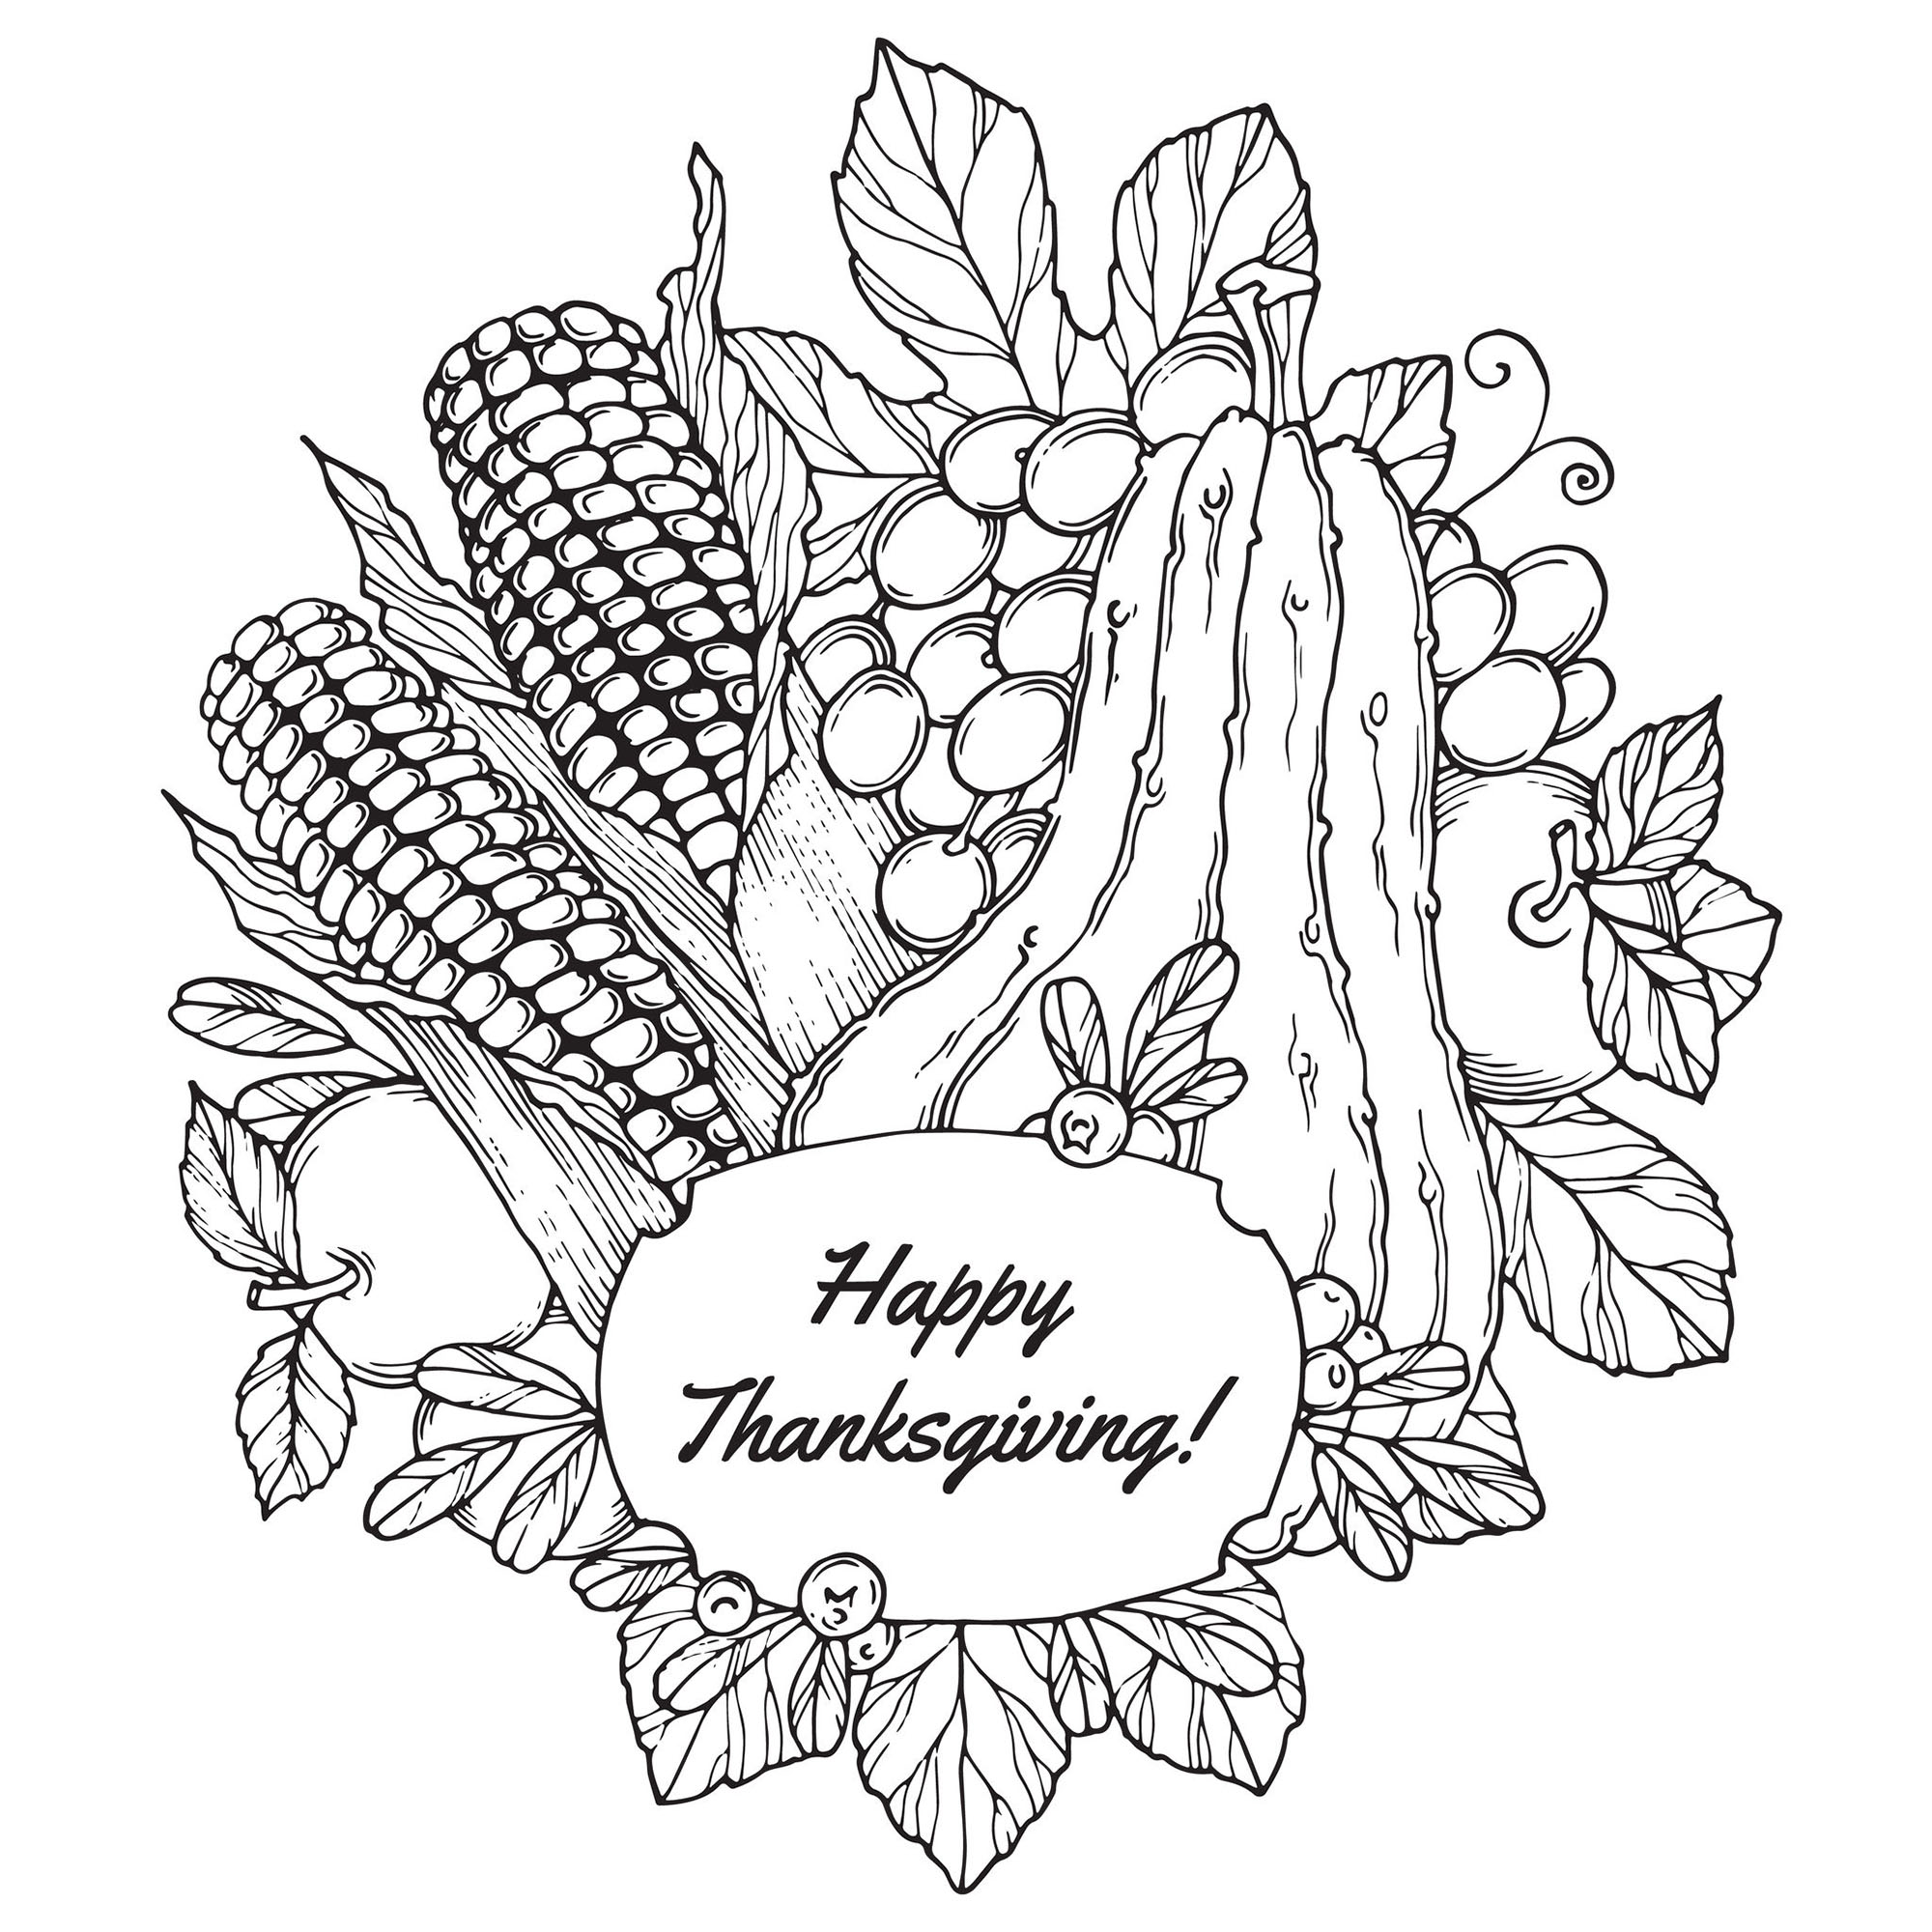 Free thanksgiving drawing to download and color